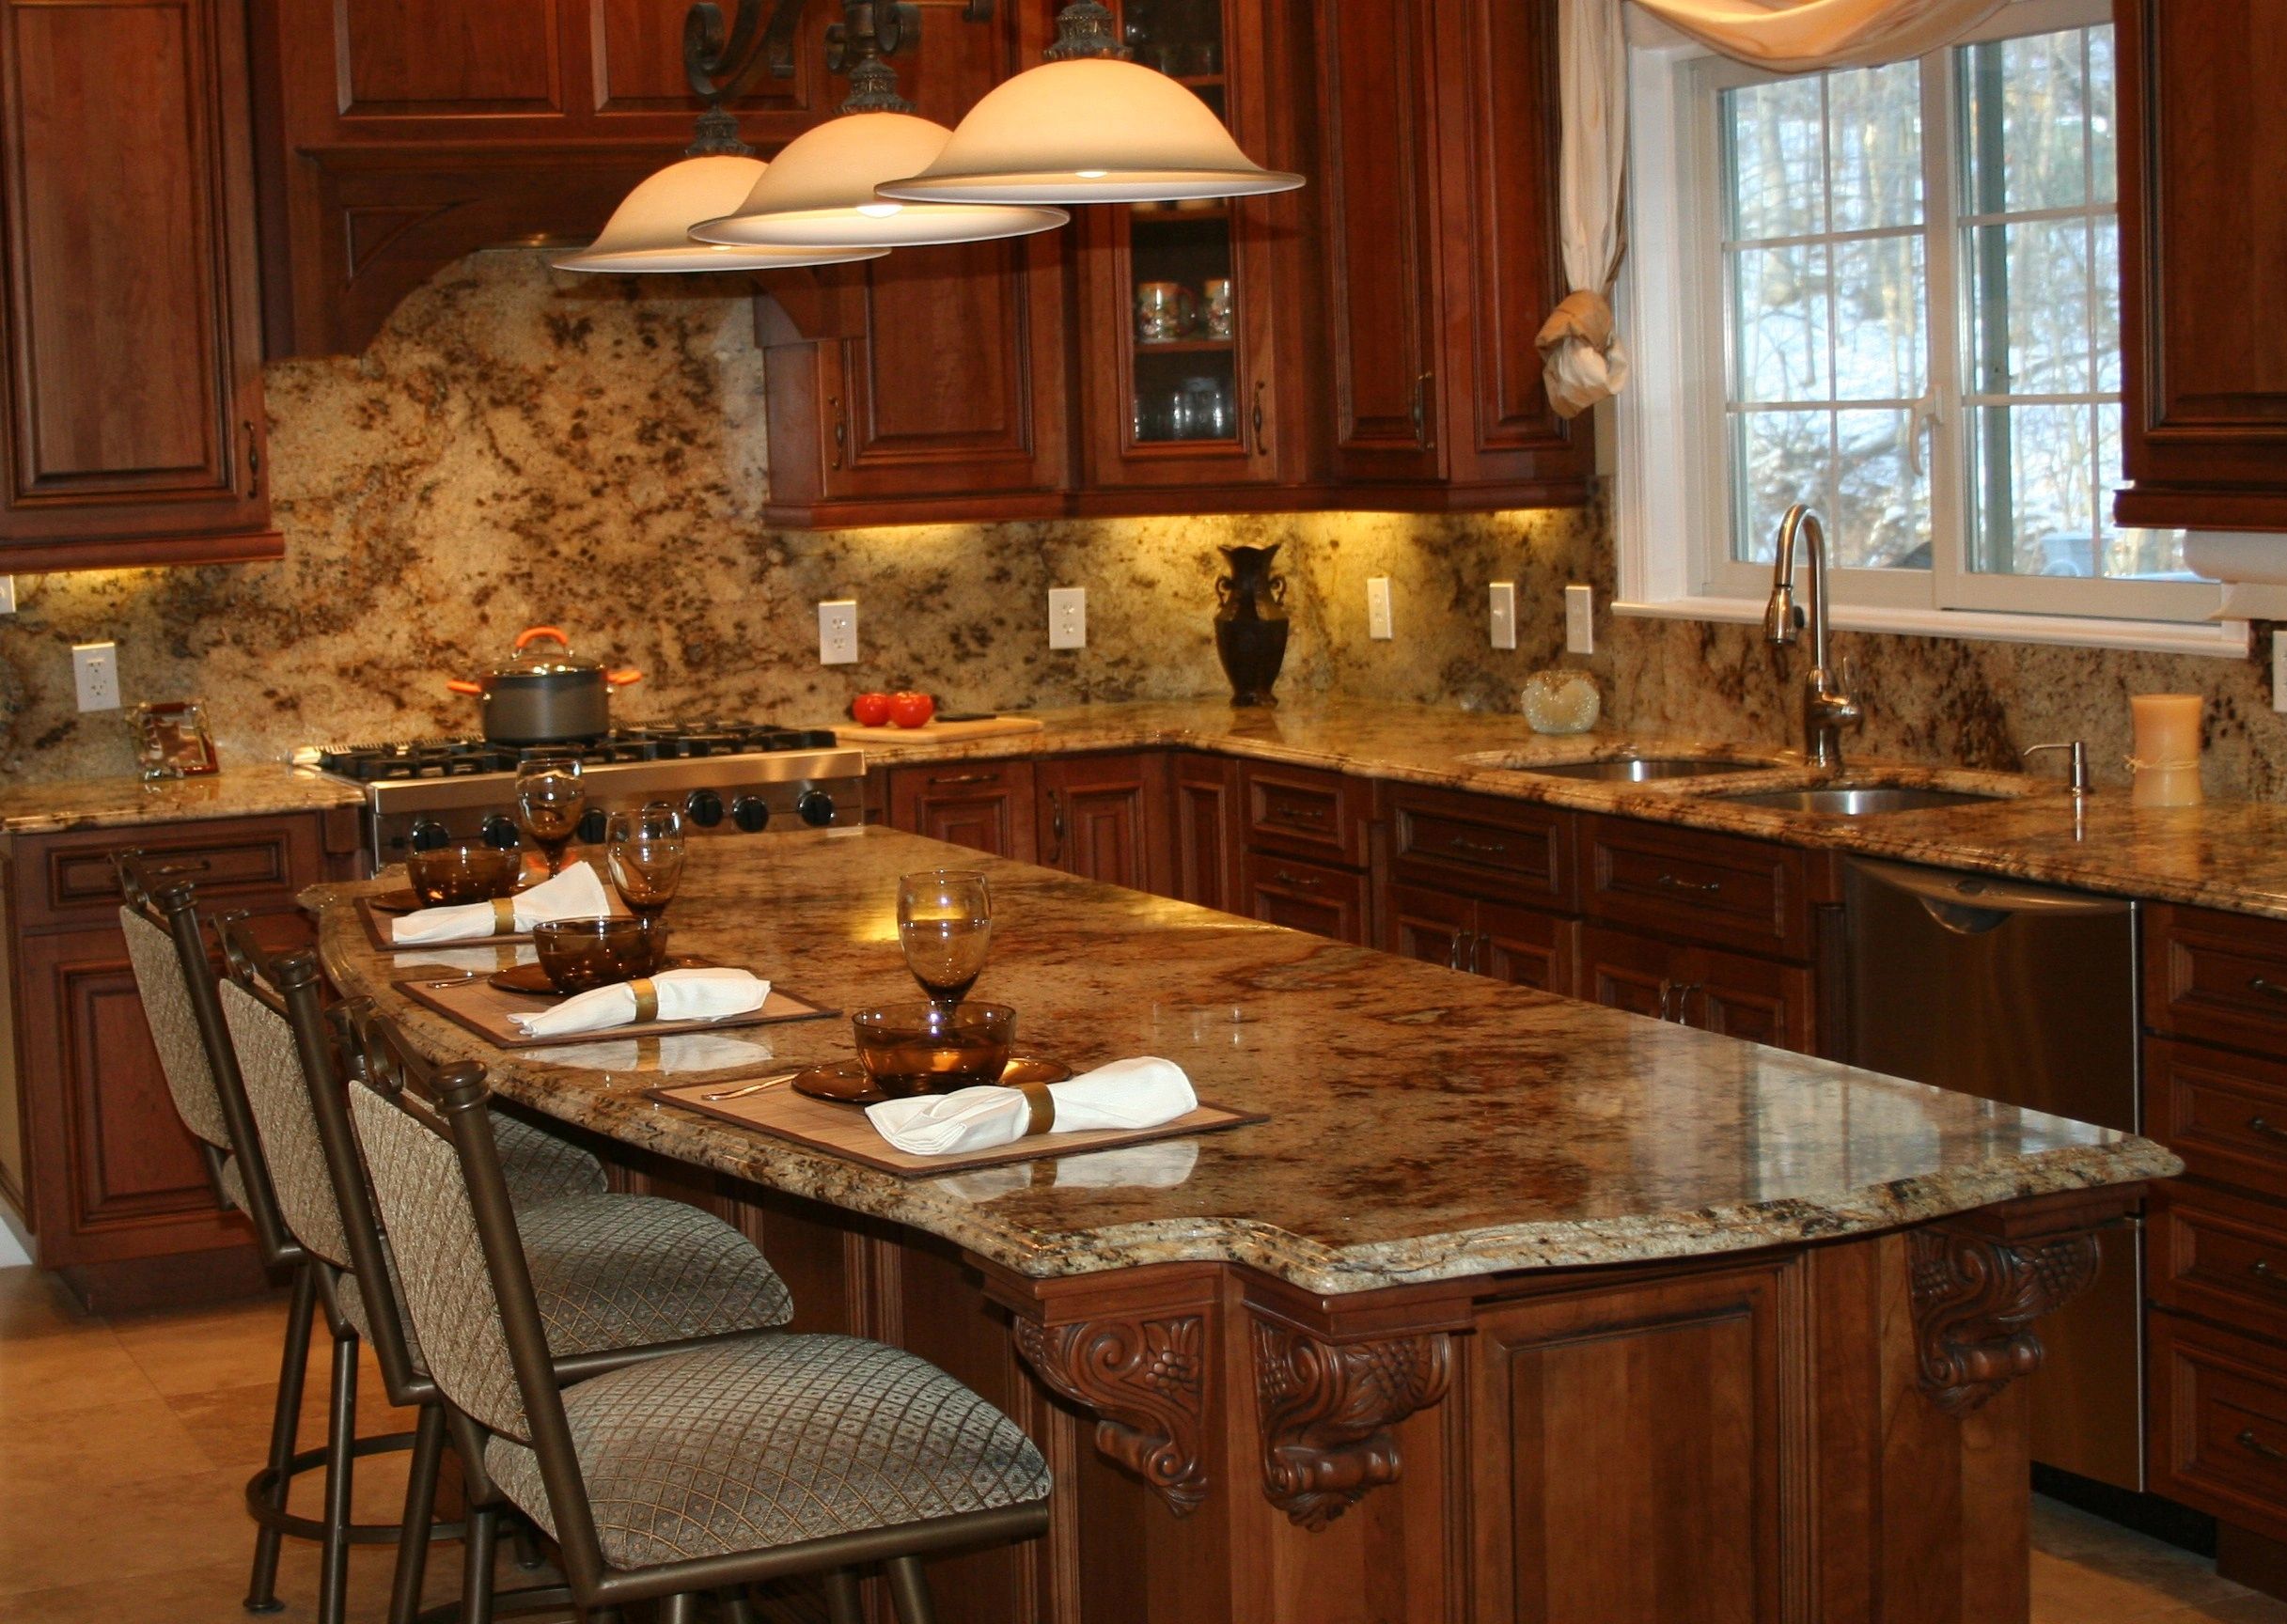 ANOTHER BEAUTIFUL KITCHEN DONE IN GOLDEN CRYSTAL GRANITE!